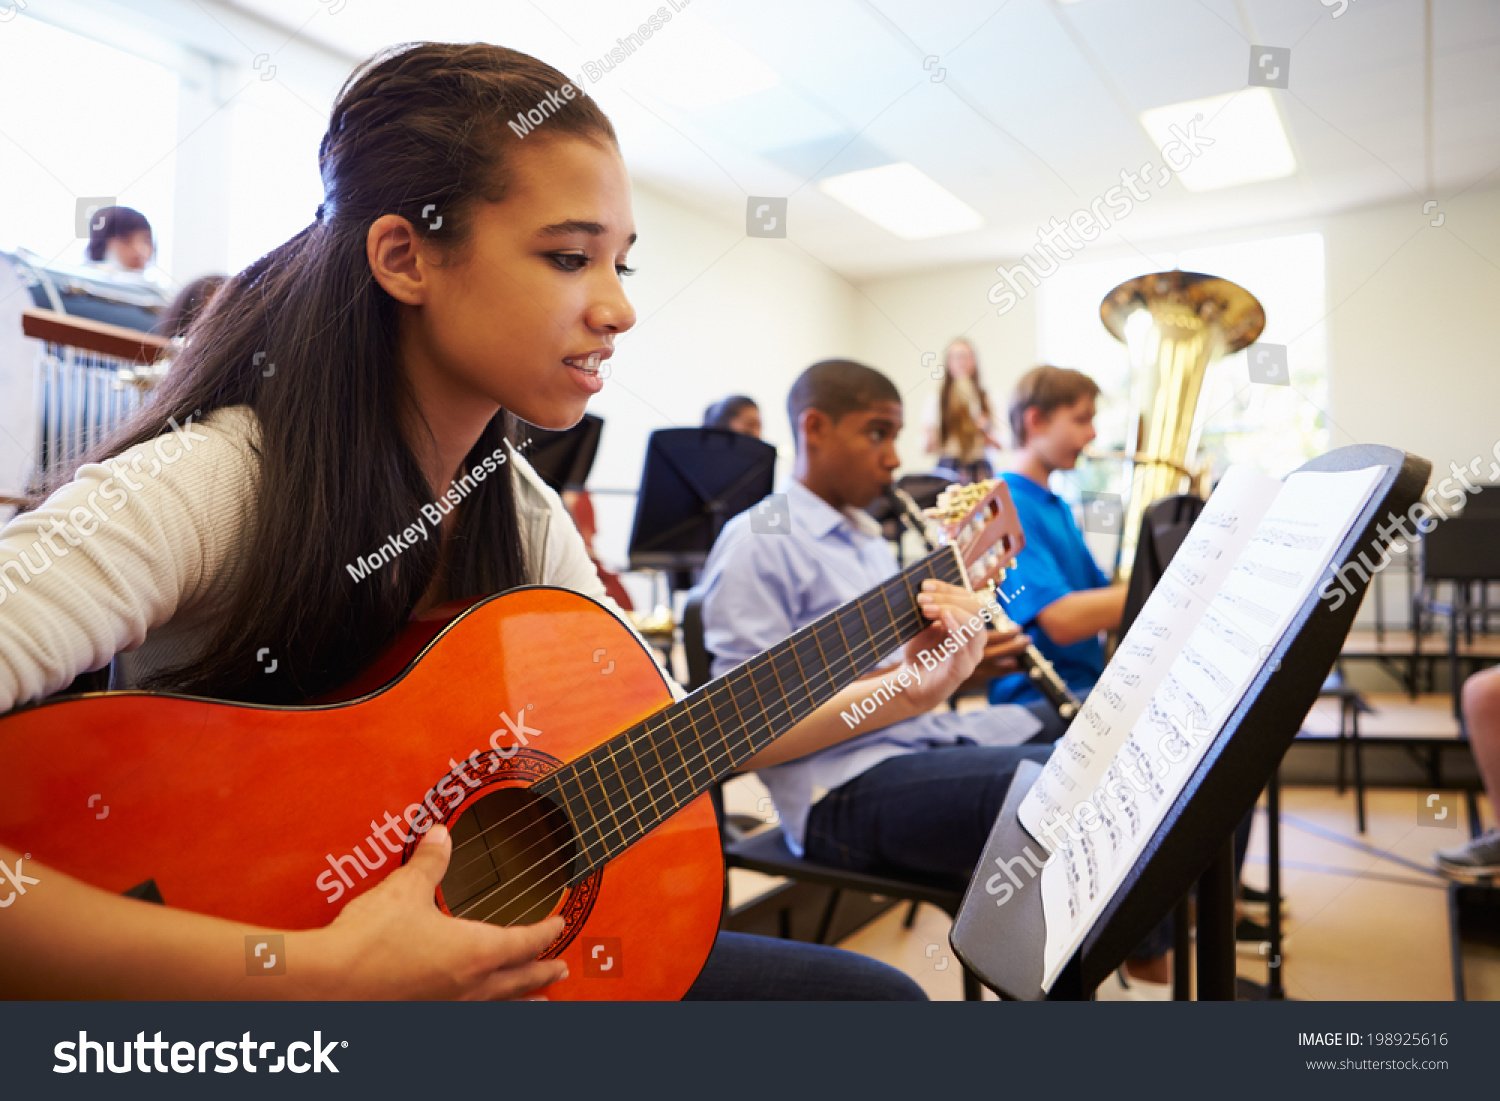 stock-photo-female-pupil-playing-guitar-in-high-school-orchestra-198925616.jpg